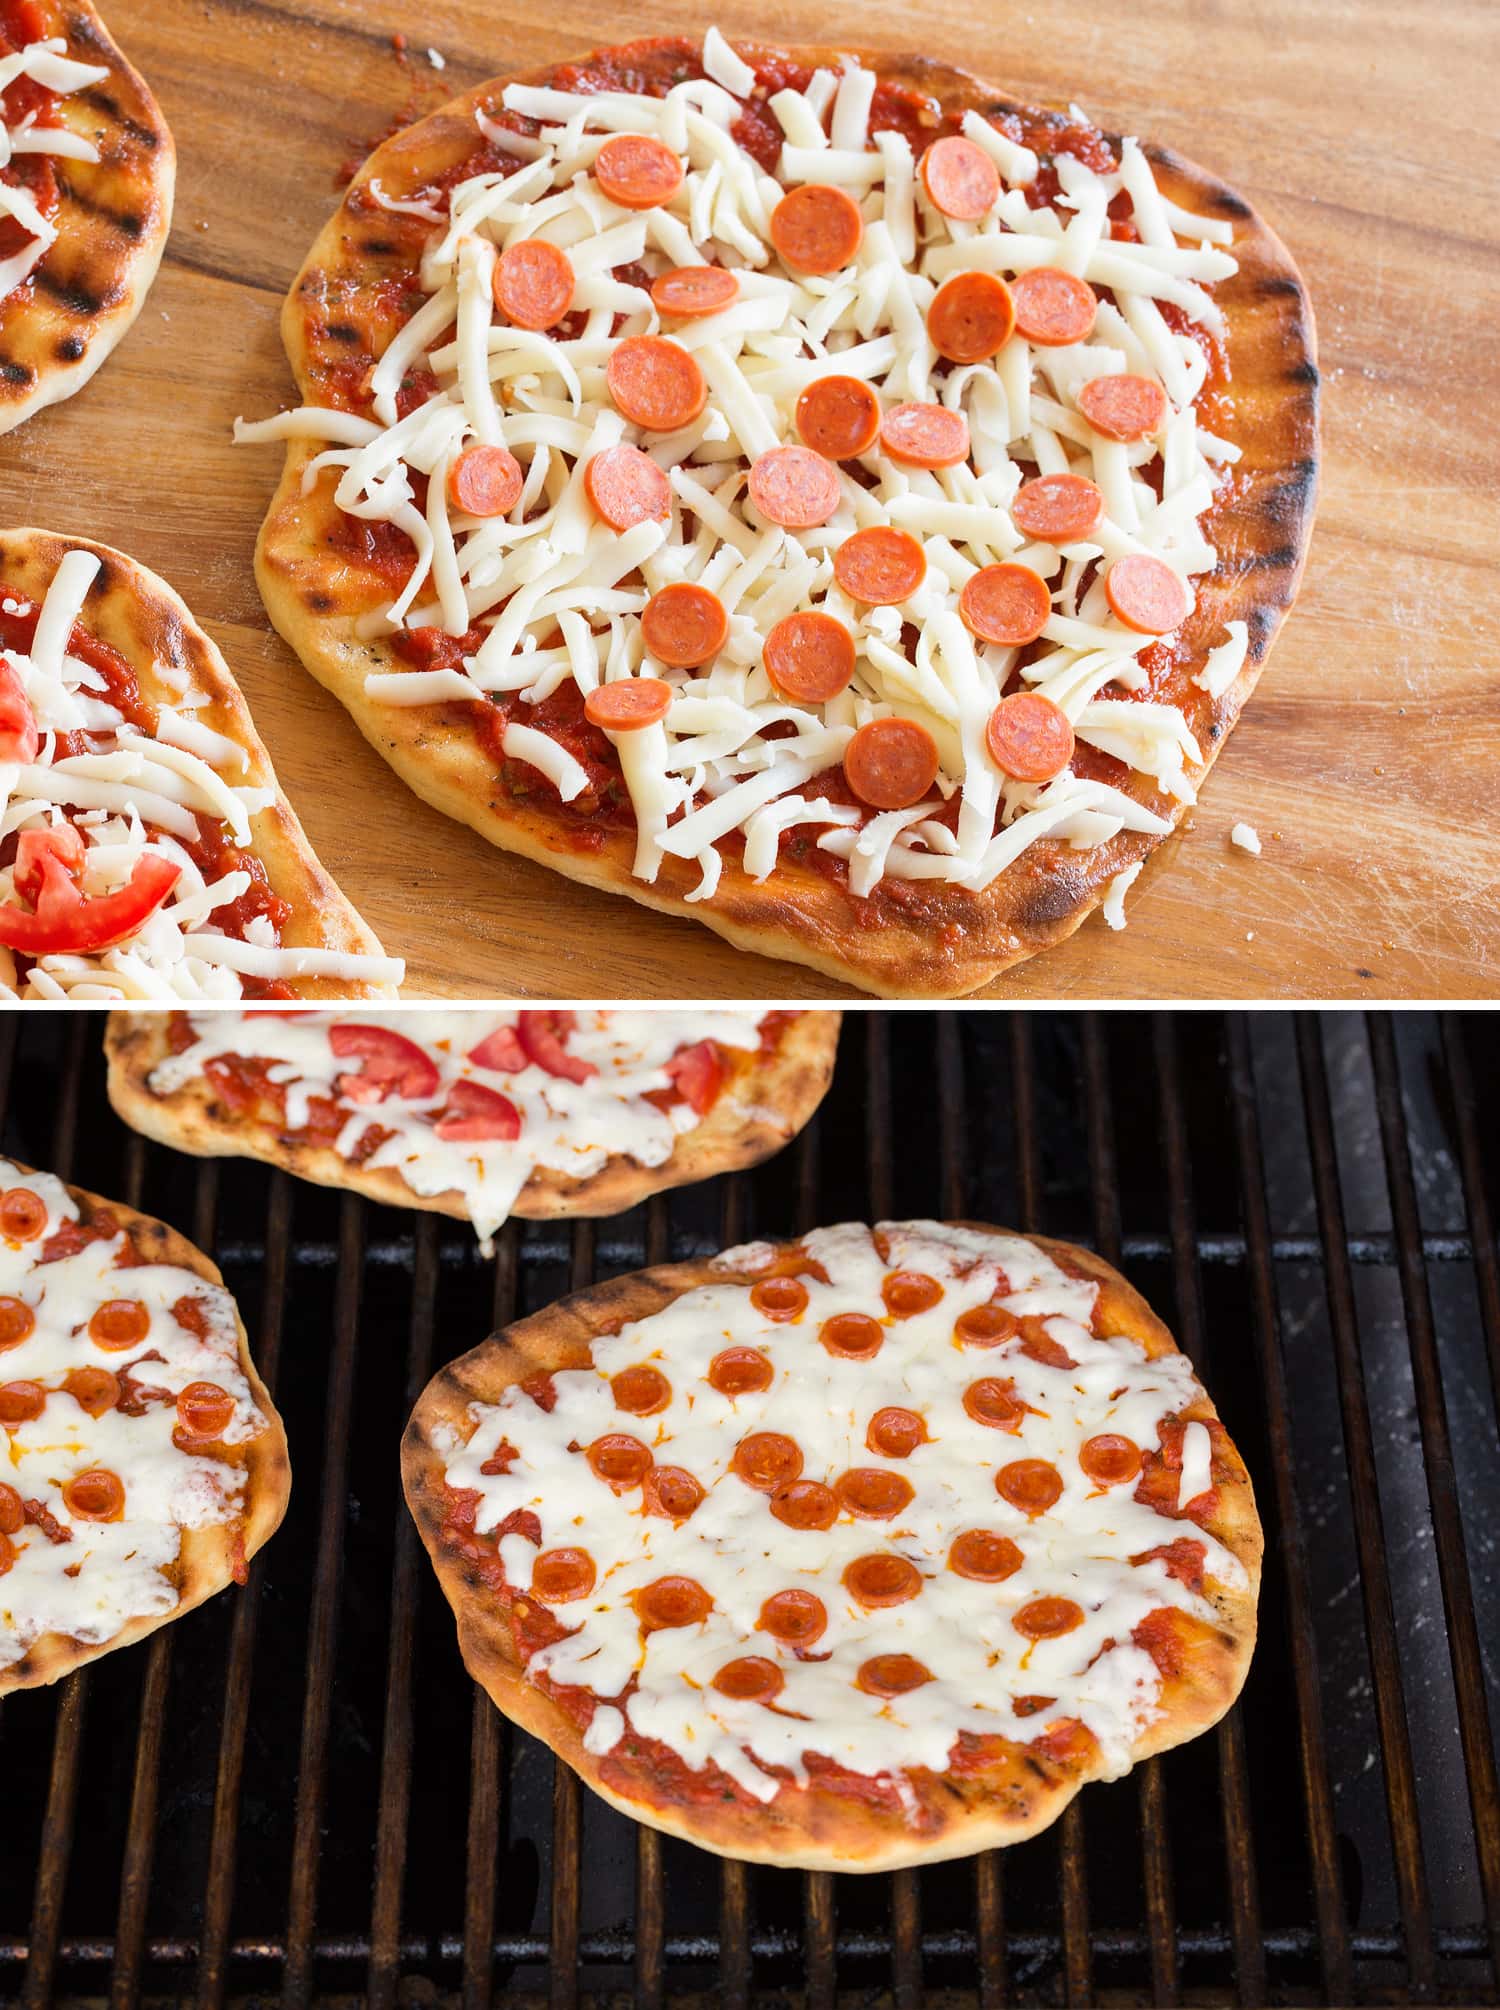 Pizza dough with toppings on grill.